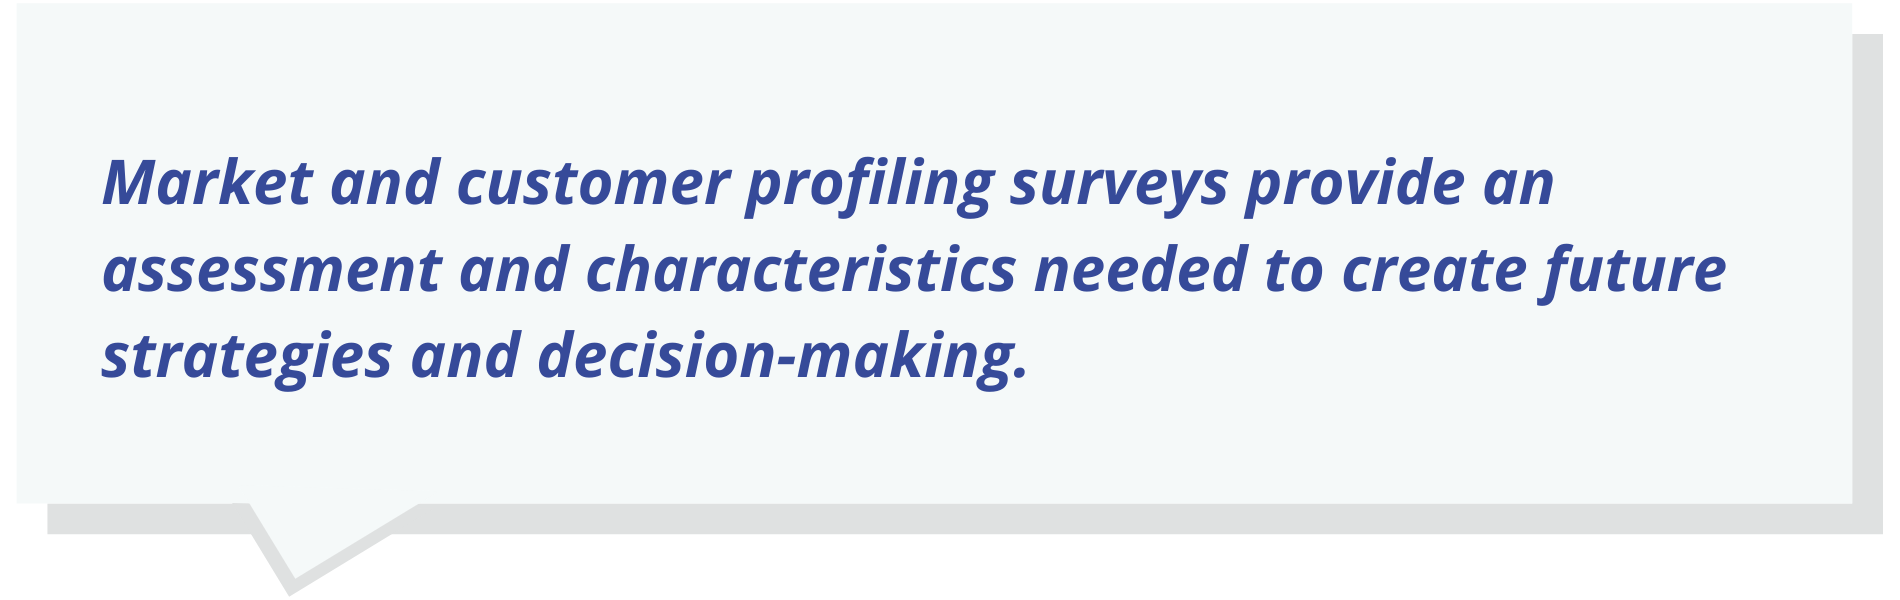 Market and customer profiling surveys provide an assessment and characteristics needed to create future strategies and decision-making.